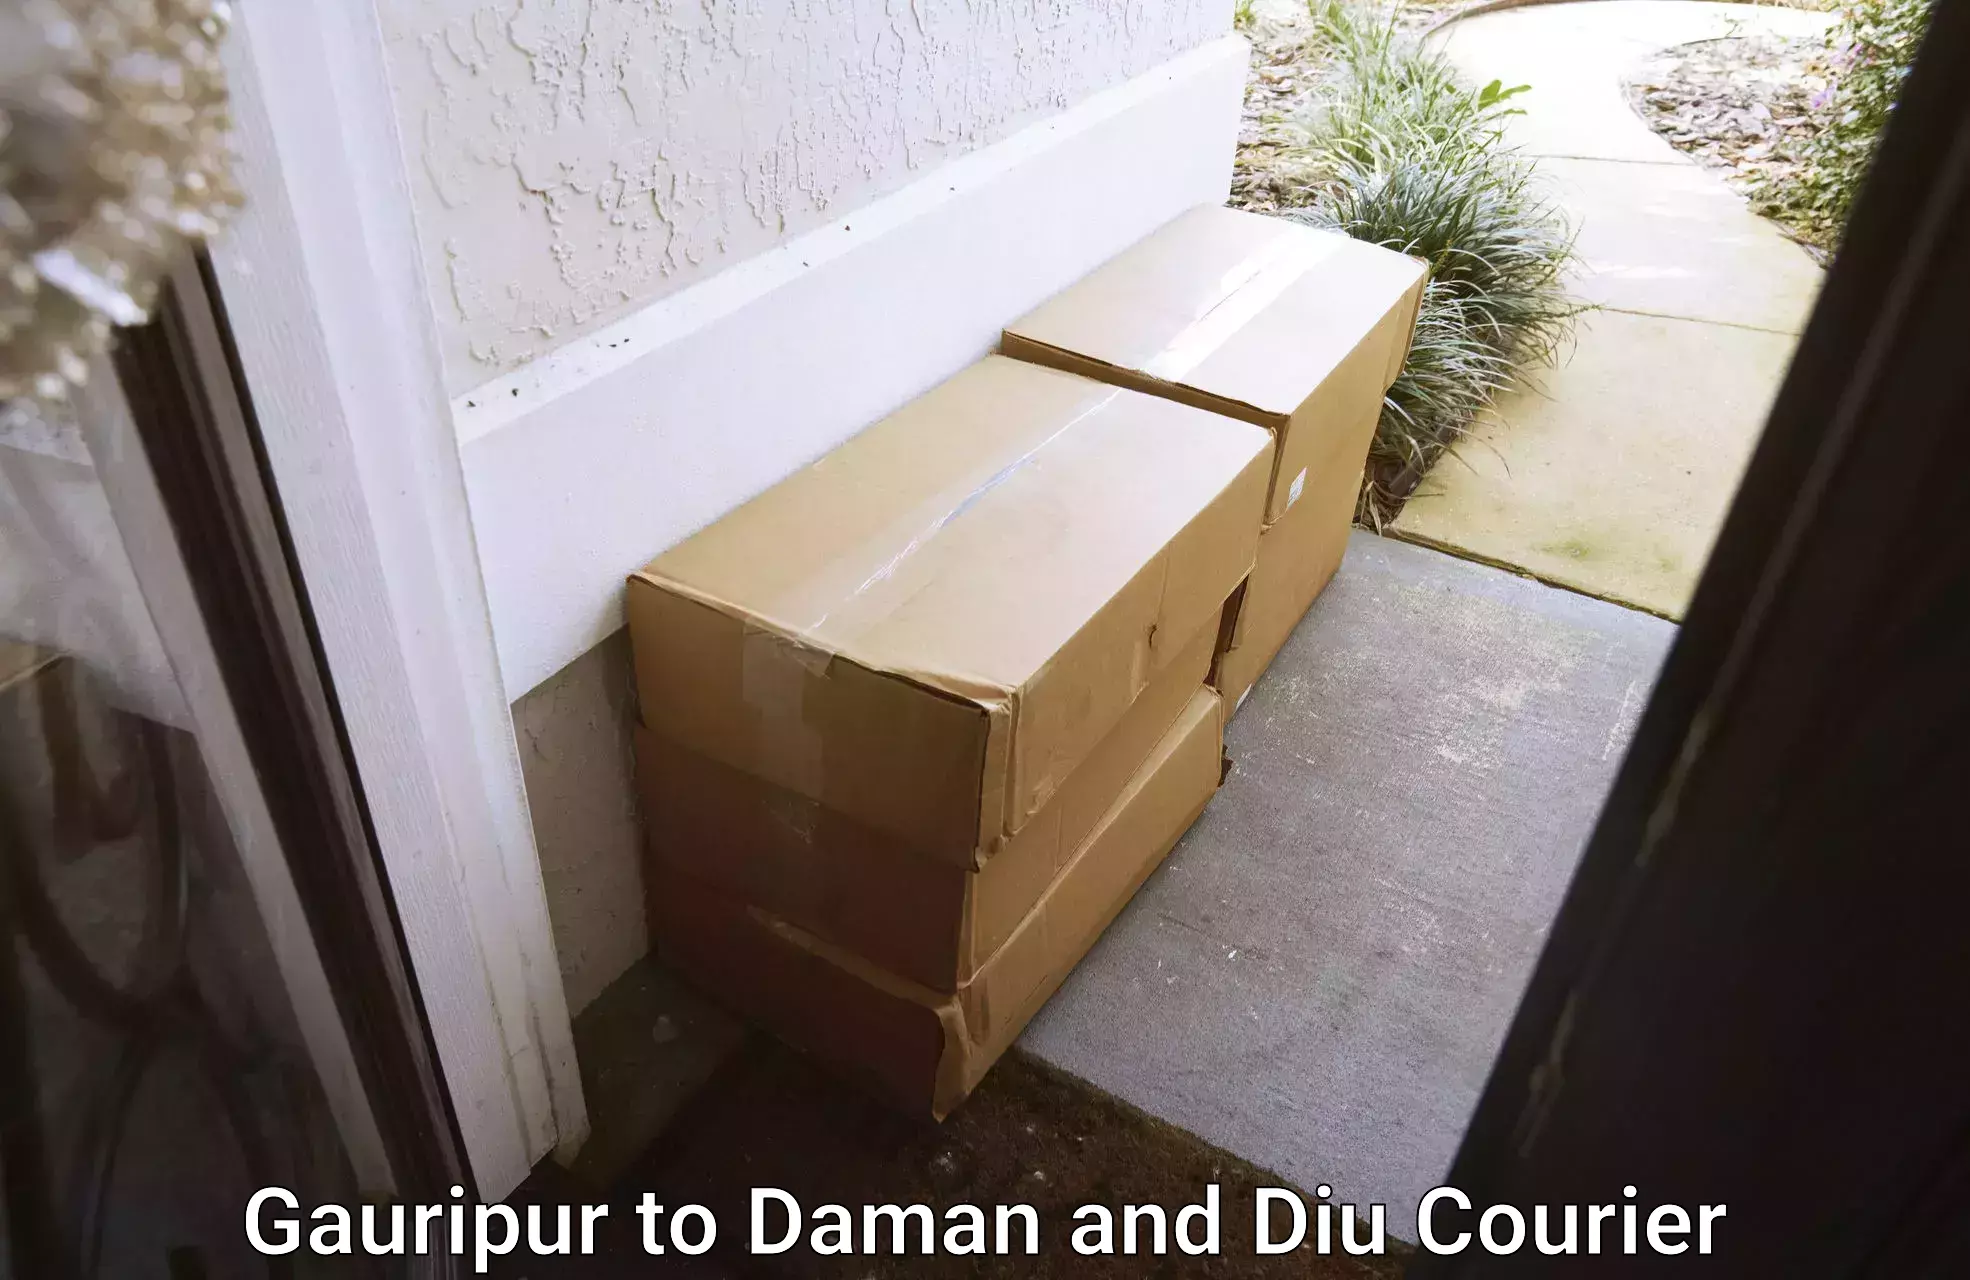 Household goods transport service Gauripur to Daman and Diu